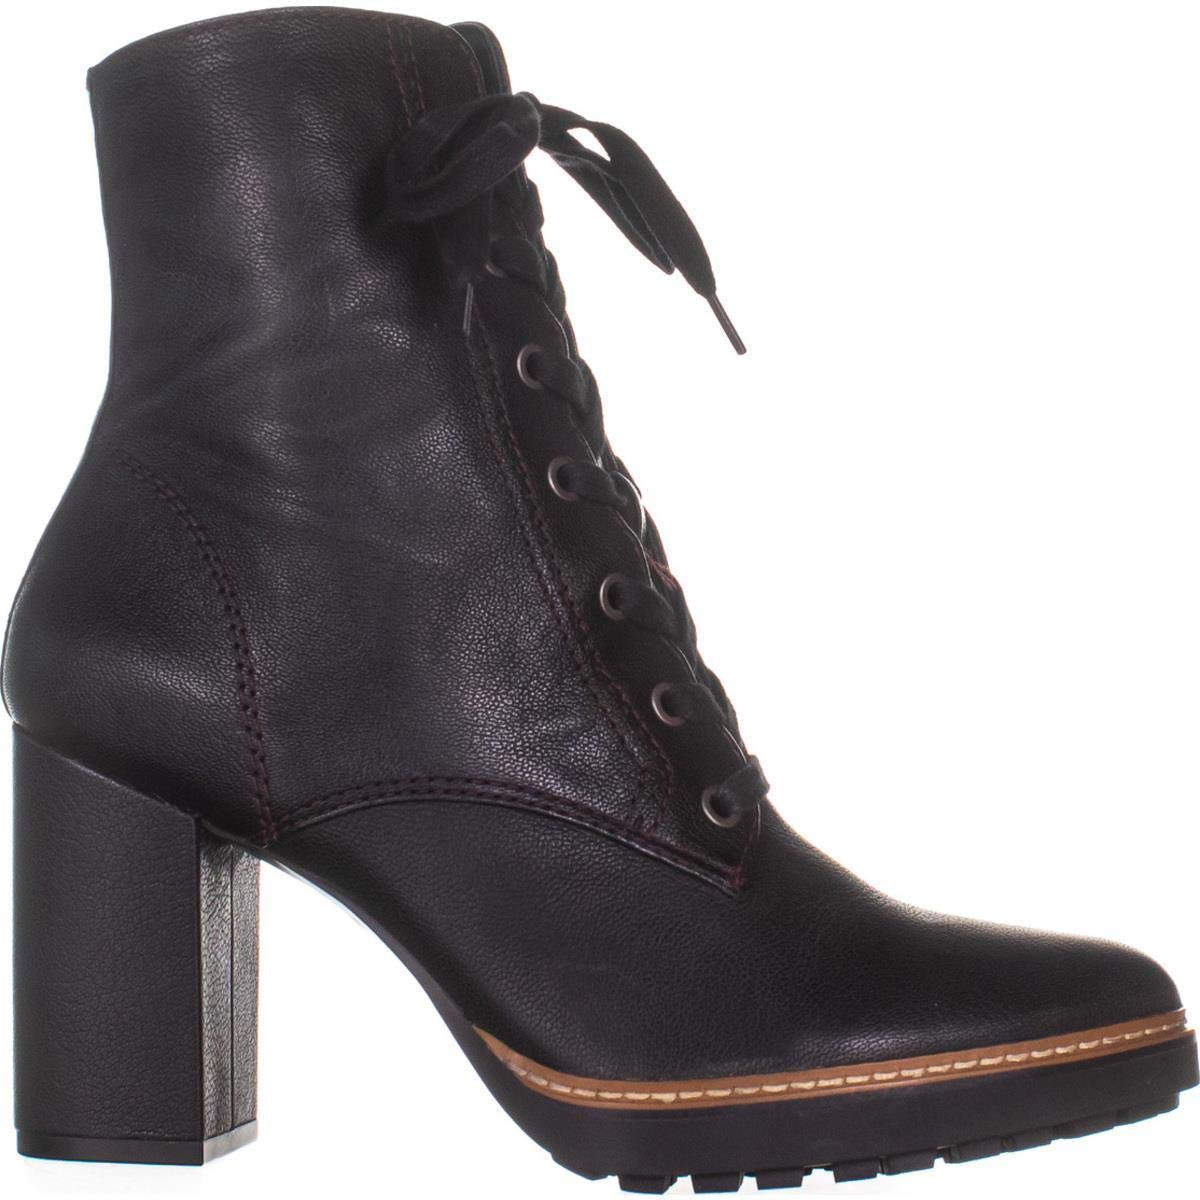 Naturalizer Womens Boots in Black Color, Size 7.5 RAL | eBay